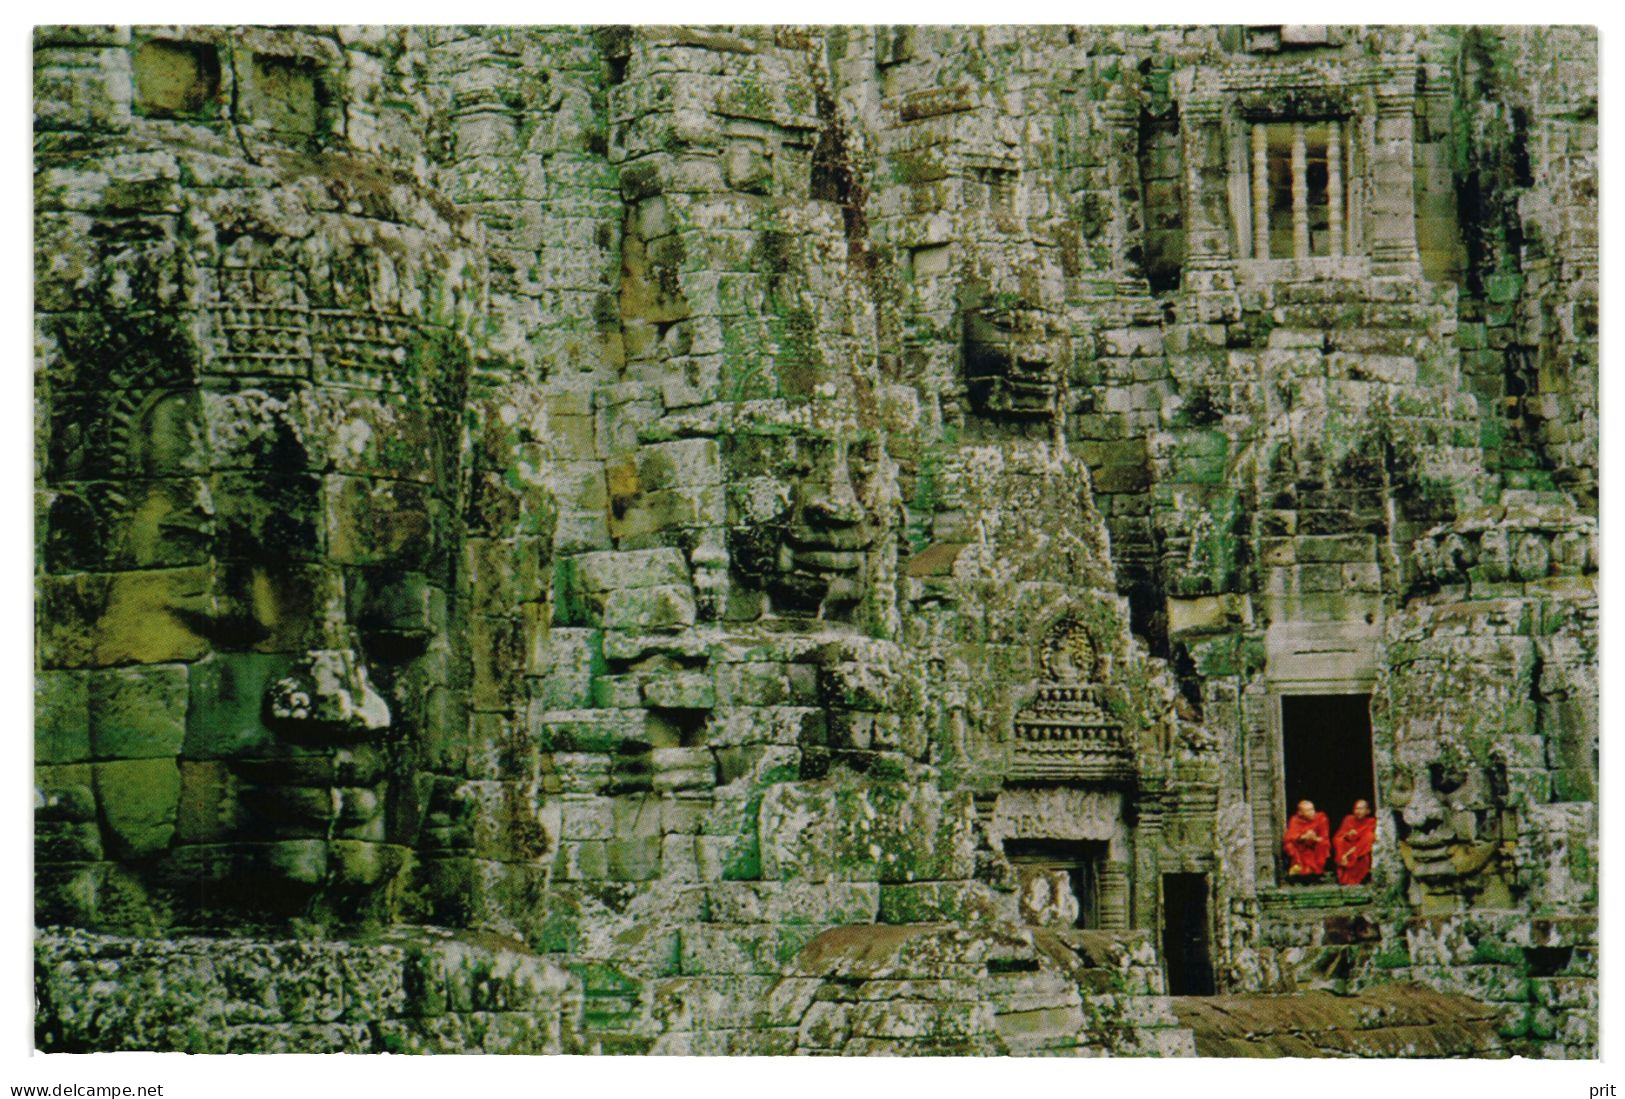 Buddhist Temple & Two Monks 1990s Unused Postcard. Publisher National Geographic Suomi, Helsinki Finland - Advertising